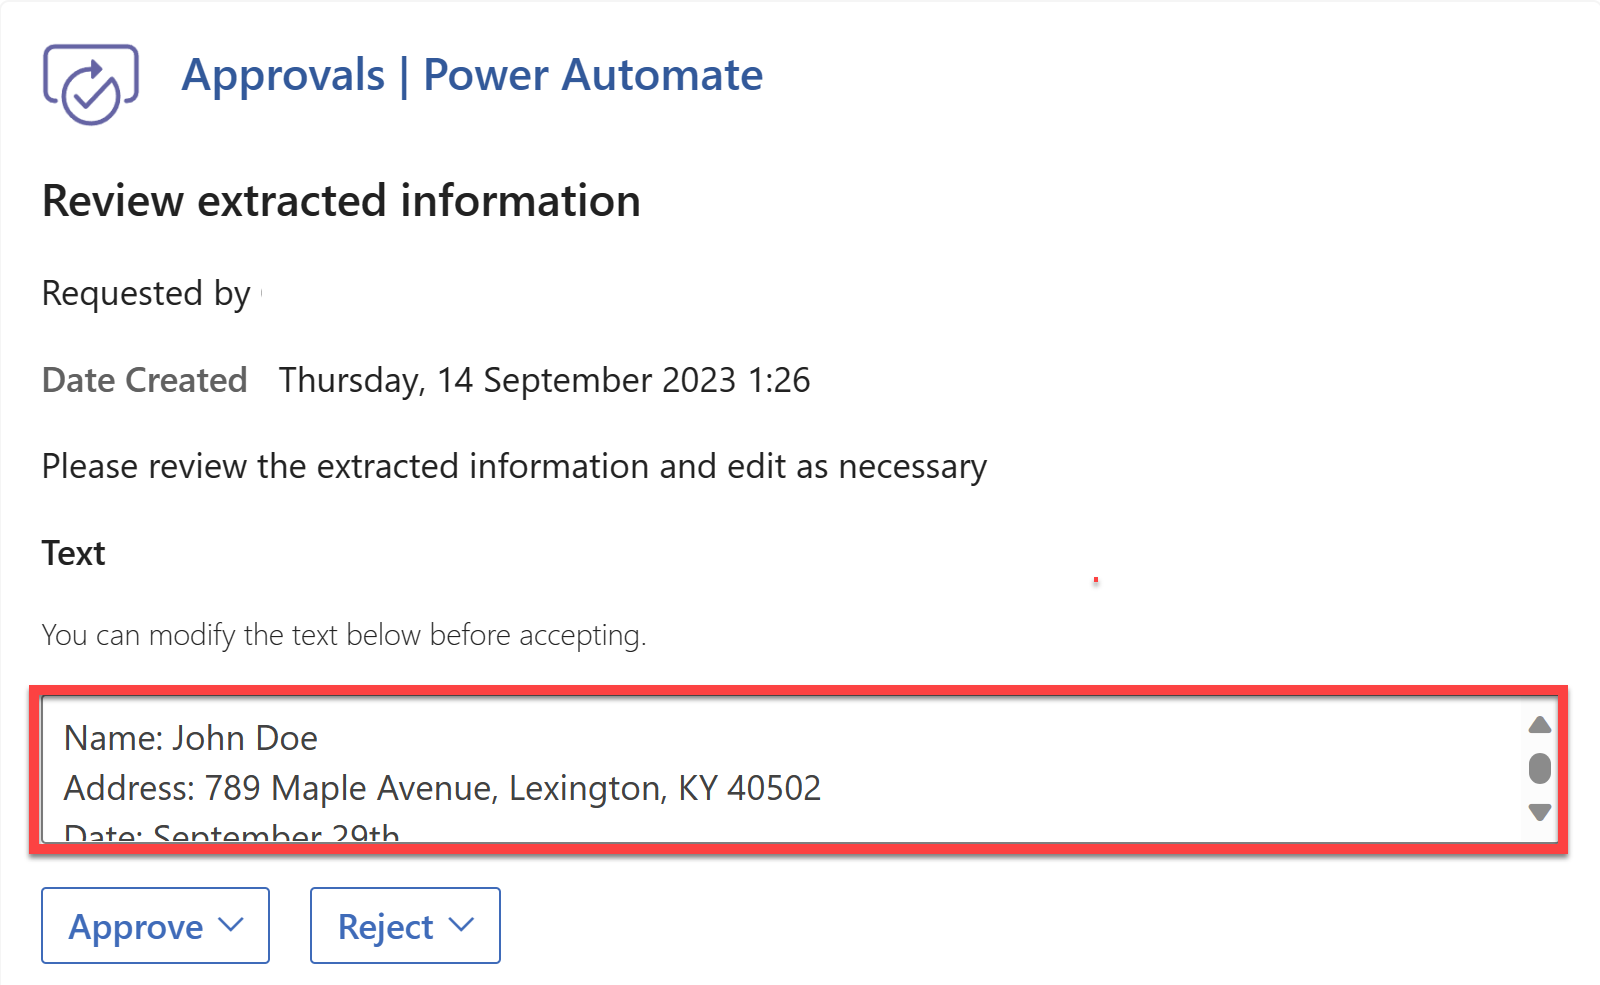 Screenshot of the Approval request in the Outlook inbox.